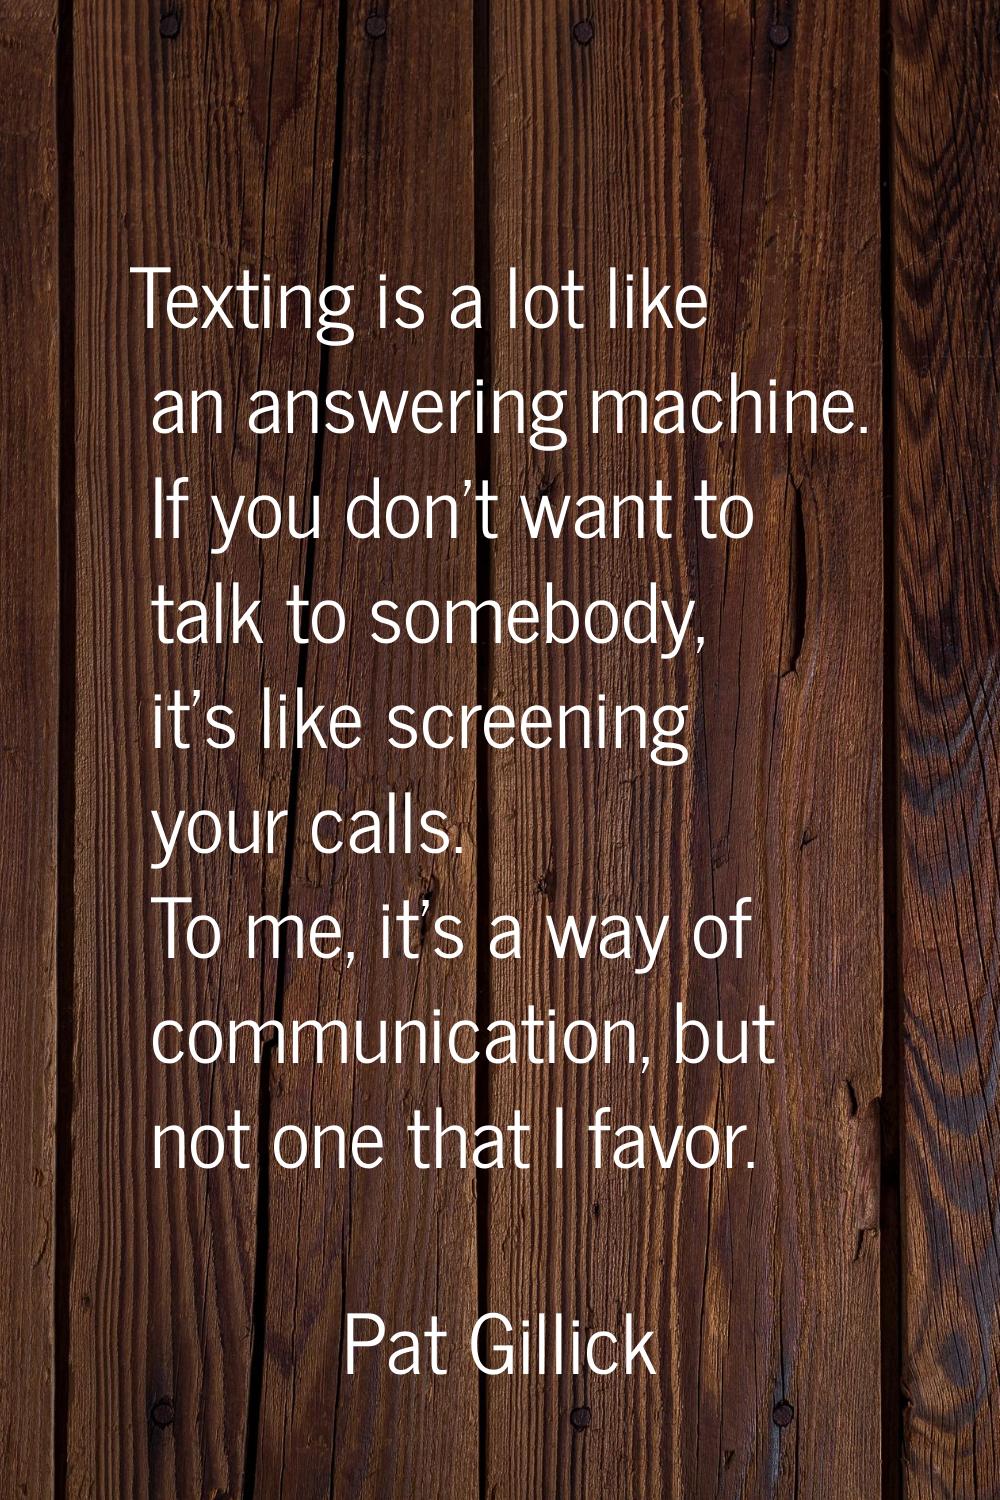 Texting is a lot like an answering machine. If you don't want to talk to somebody, it's like screen